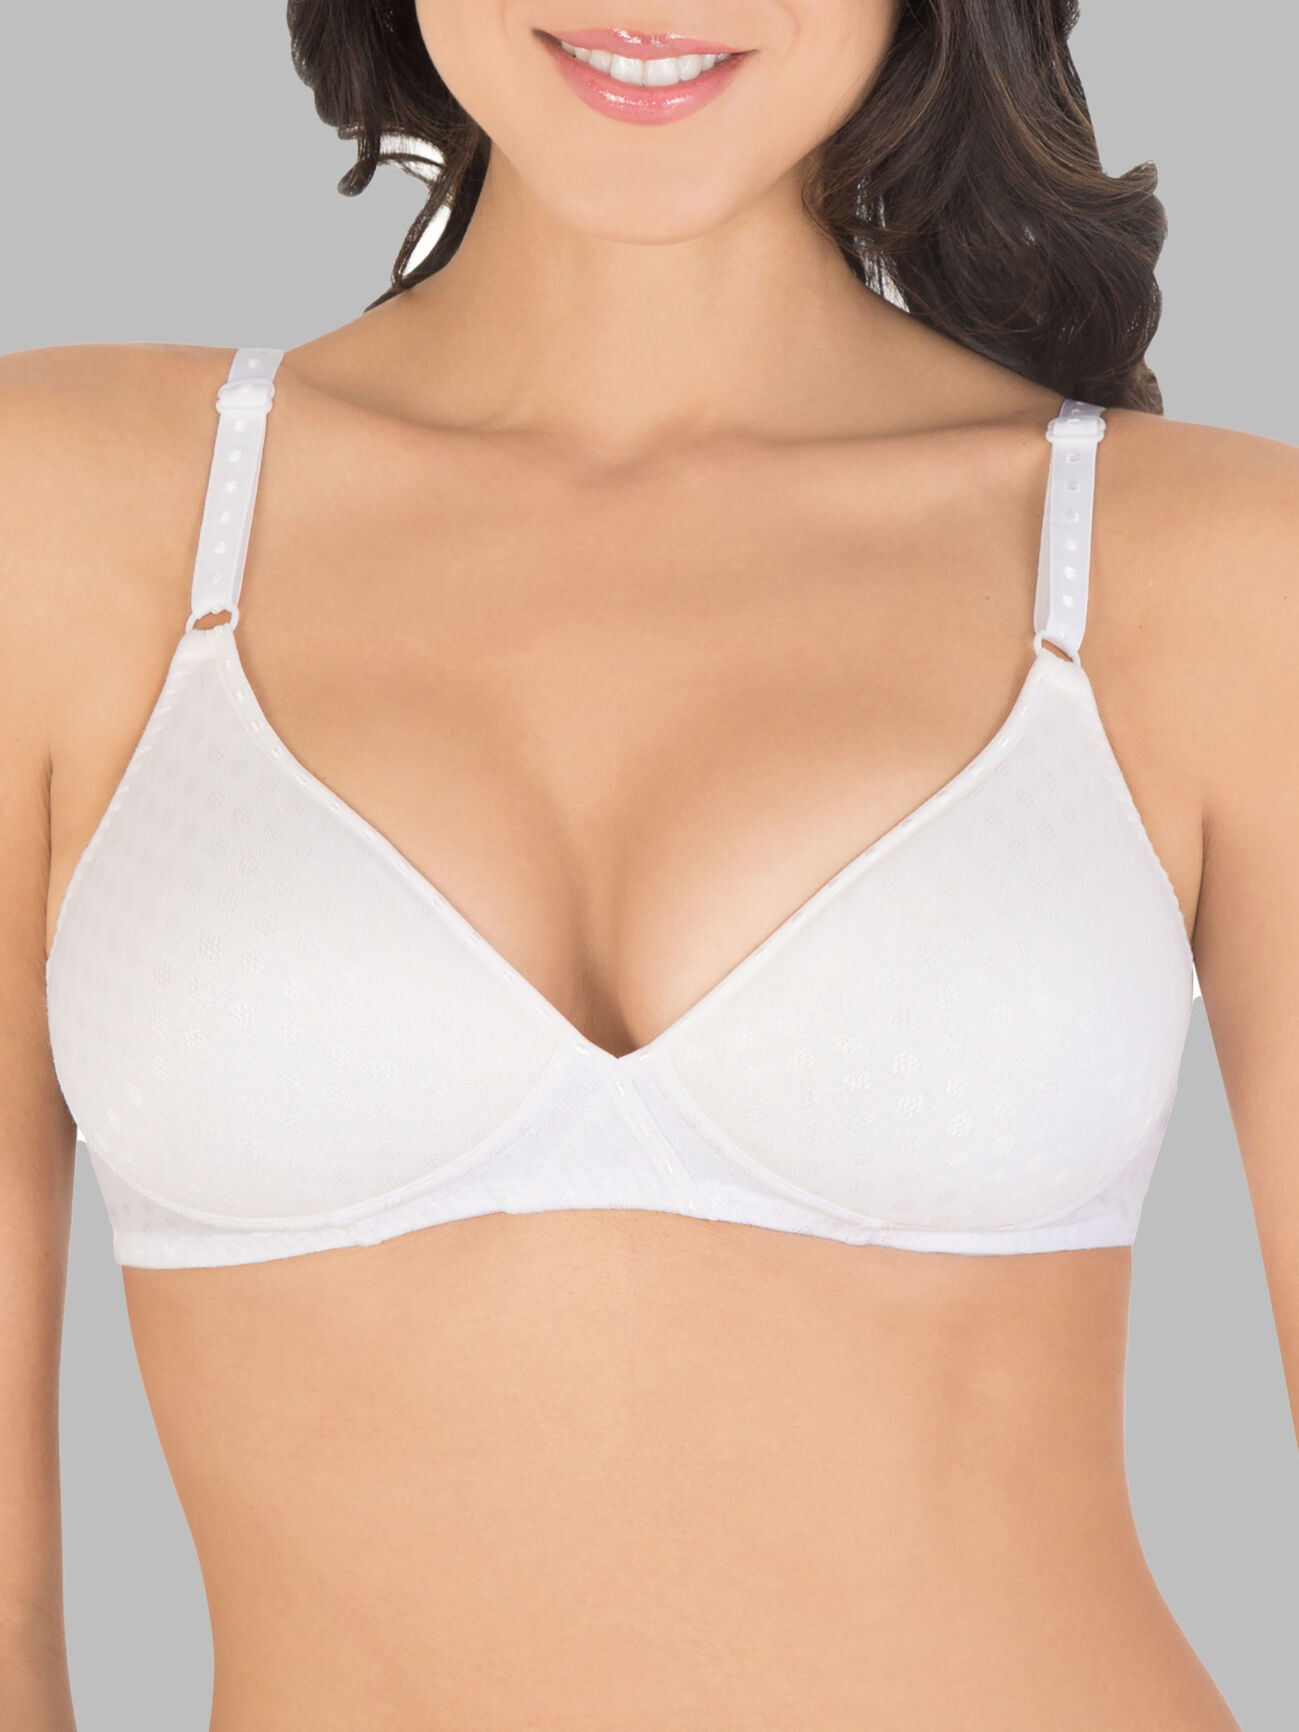 Women's Bras with Underwire 40B Good Selling Classic Breathable